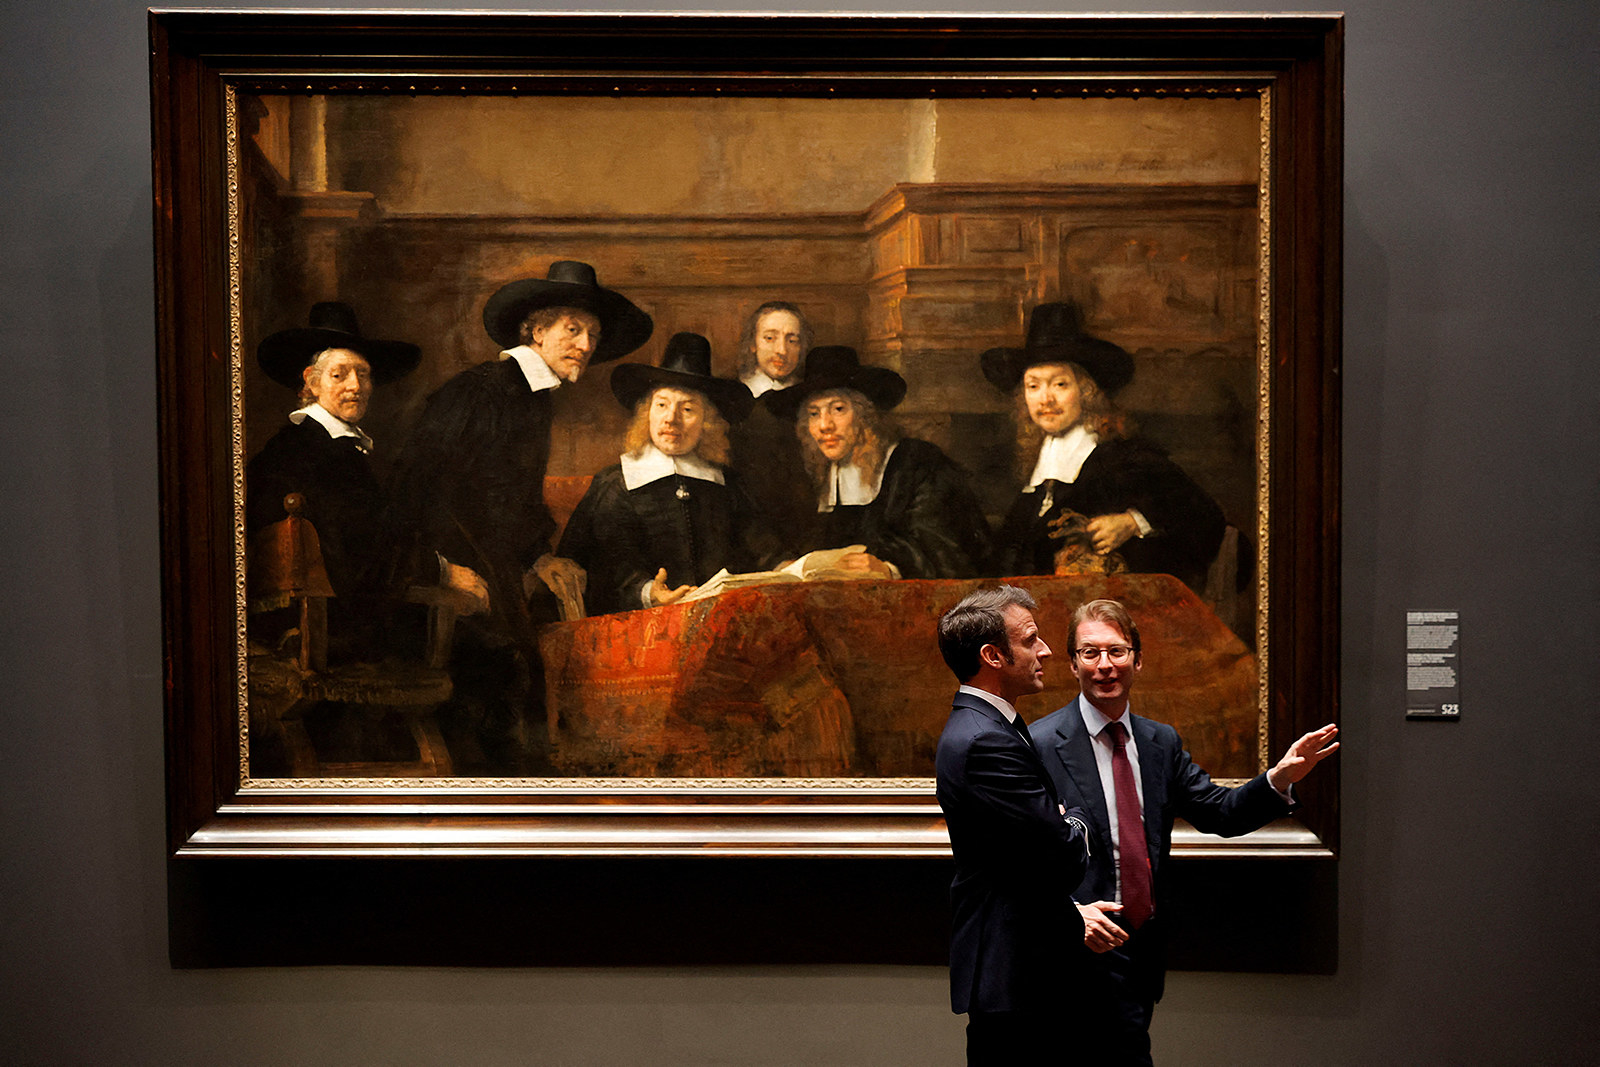 French President Emmanuel Macron and Rijksmuseum&#x27;s Director Taco Dibbits talk as they visit the Rijksmuseum, in Amsterdam, Netherlands